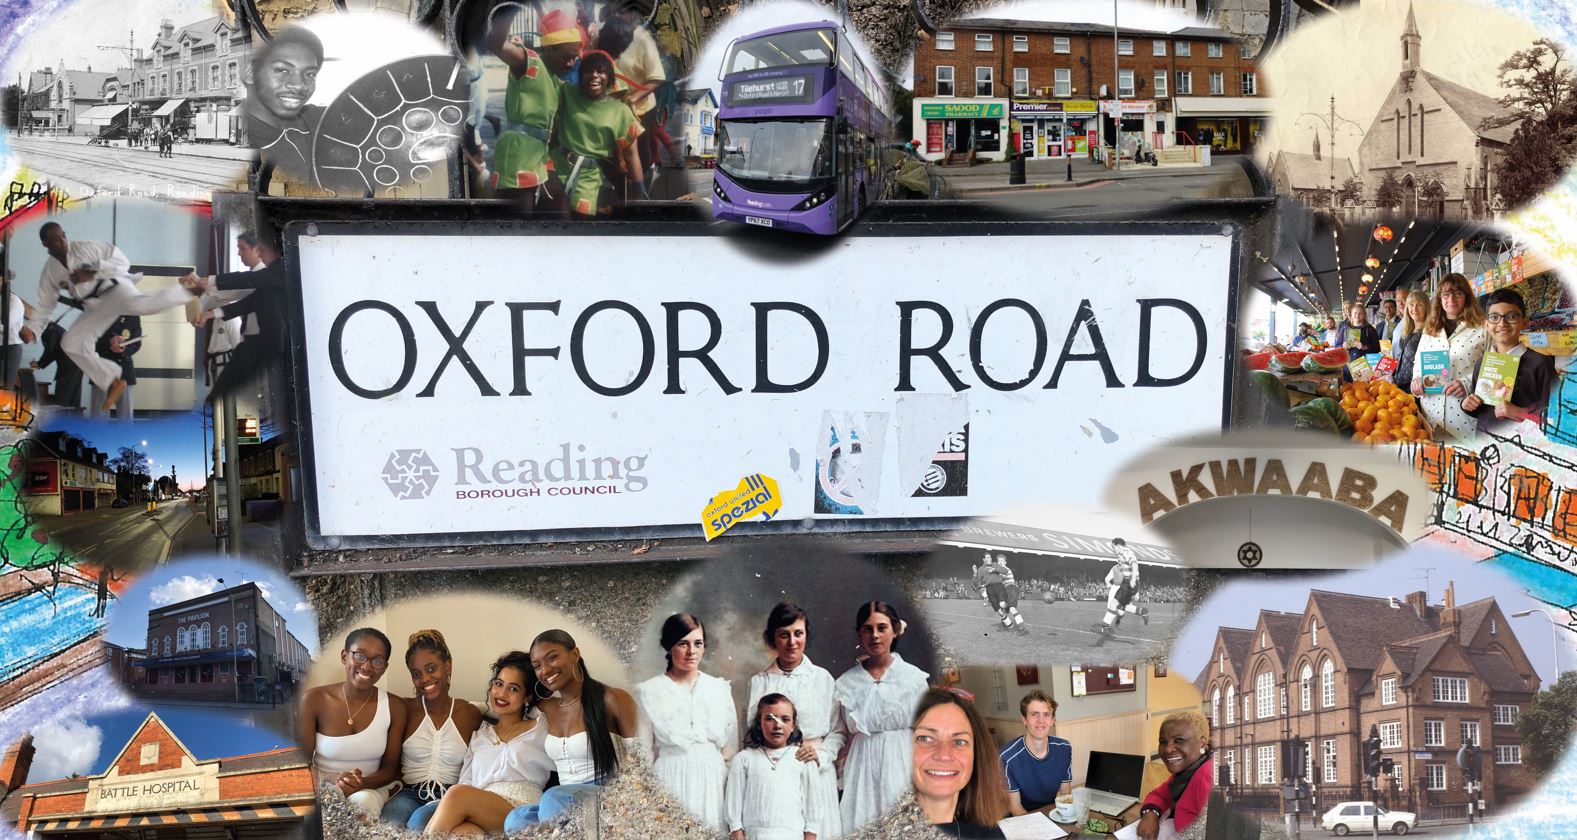 Composite image of people and landmarks in Oxford Road, Reading.